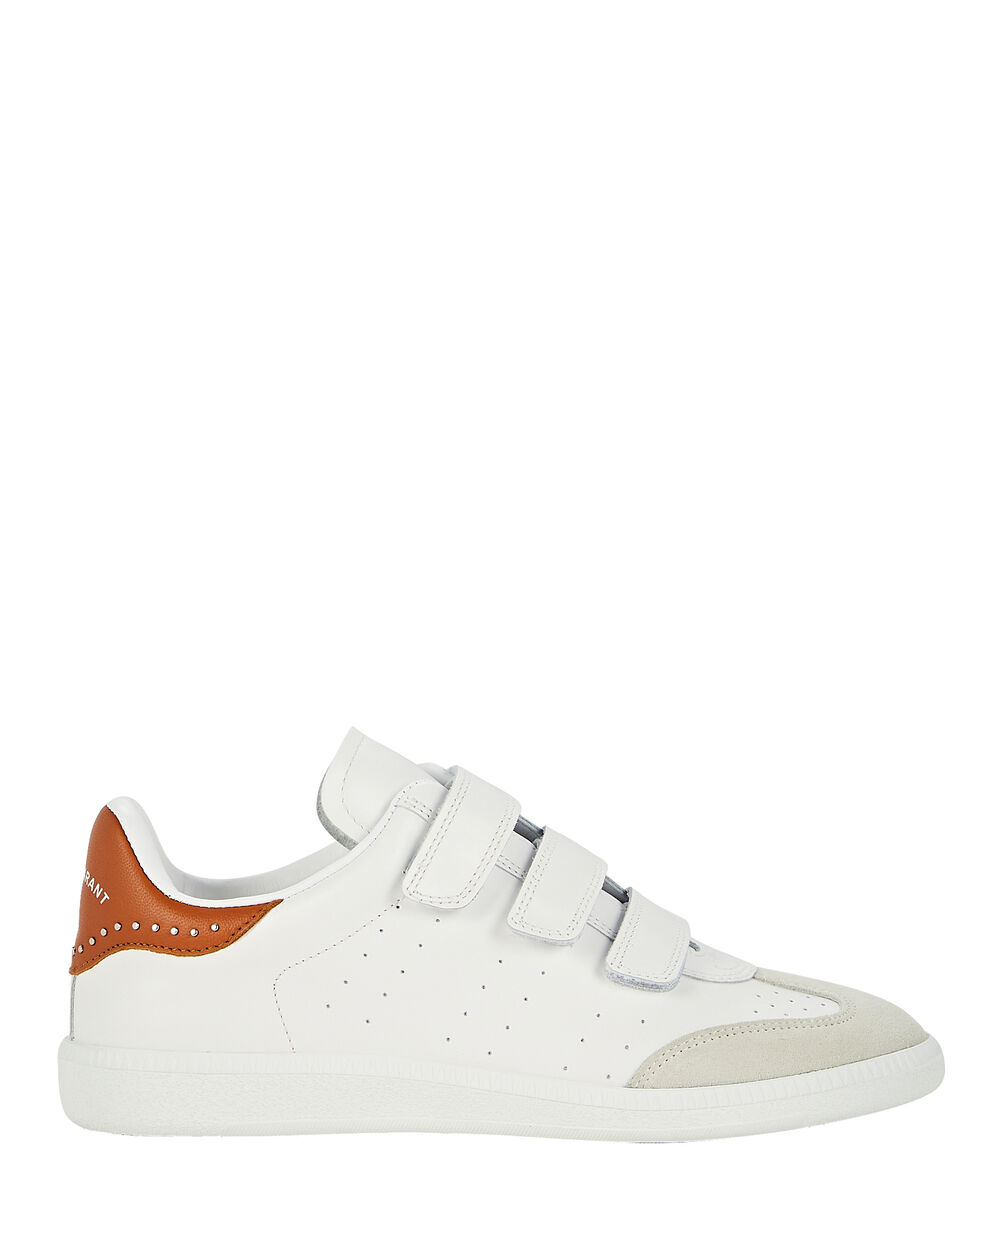 Isabel Marant Beth Velcro Strap Leather Sneakers | INTERMIX®